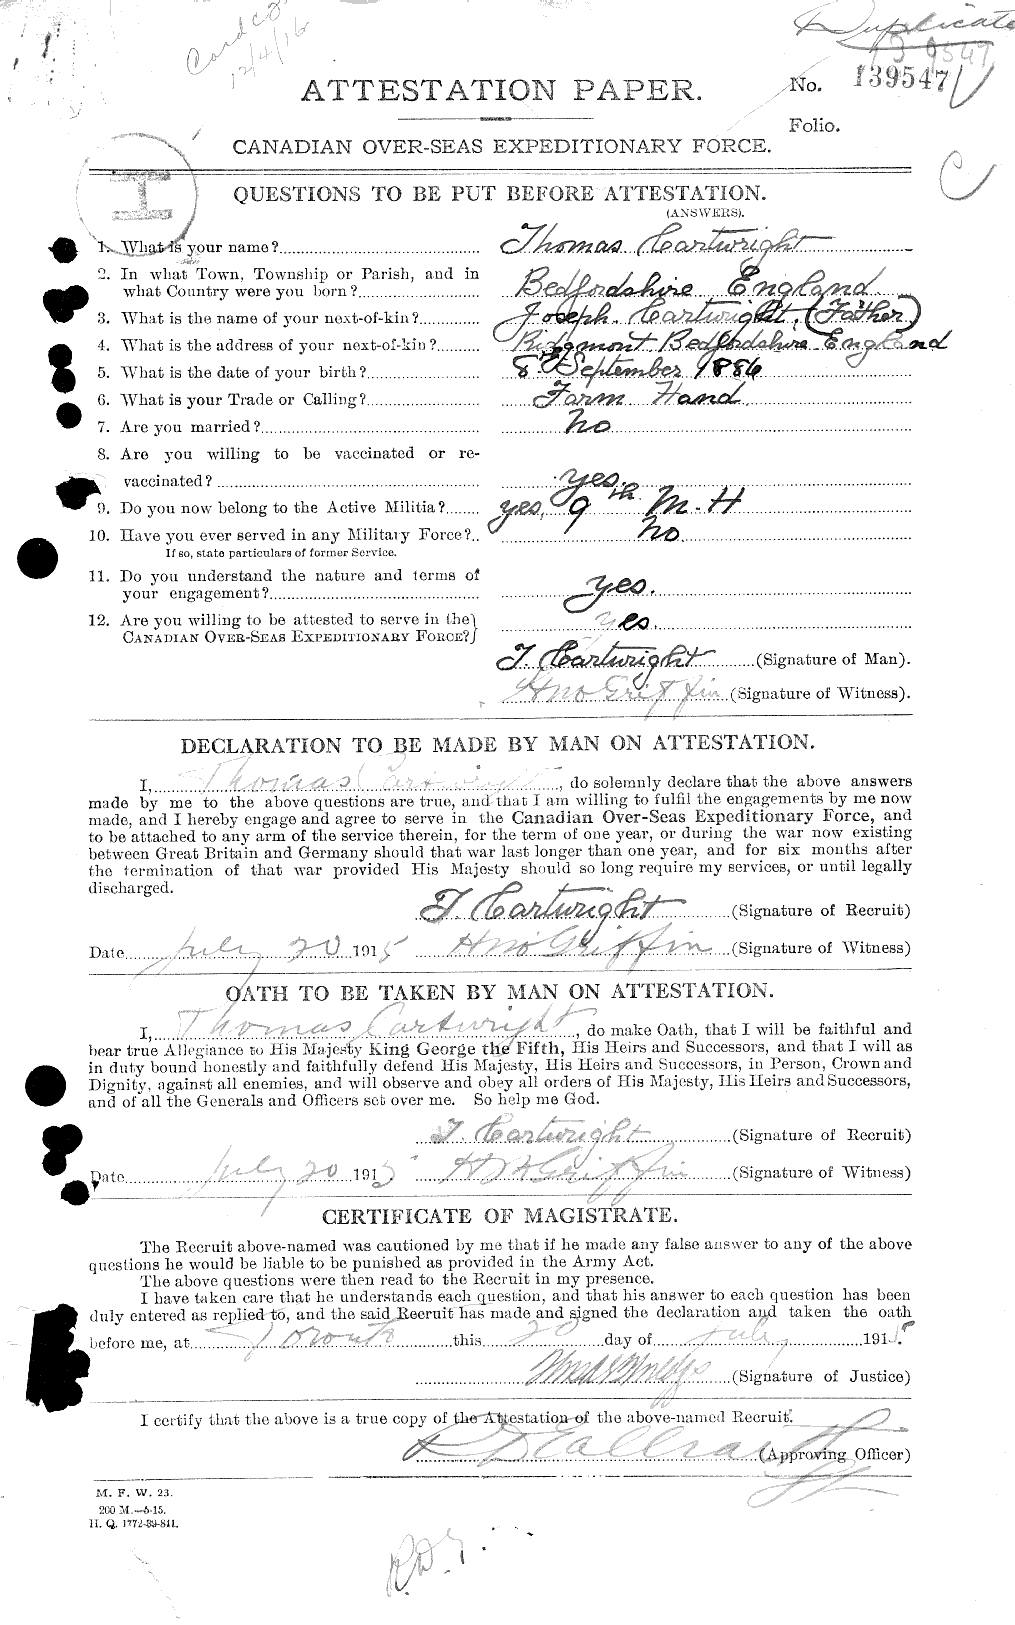 Personnel Records of the First World War - CEF 011625a